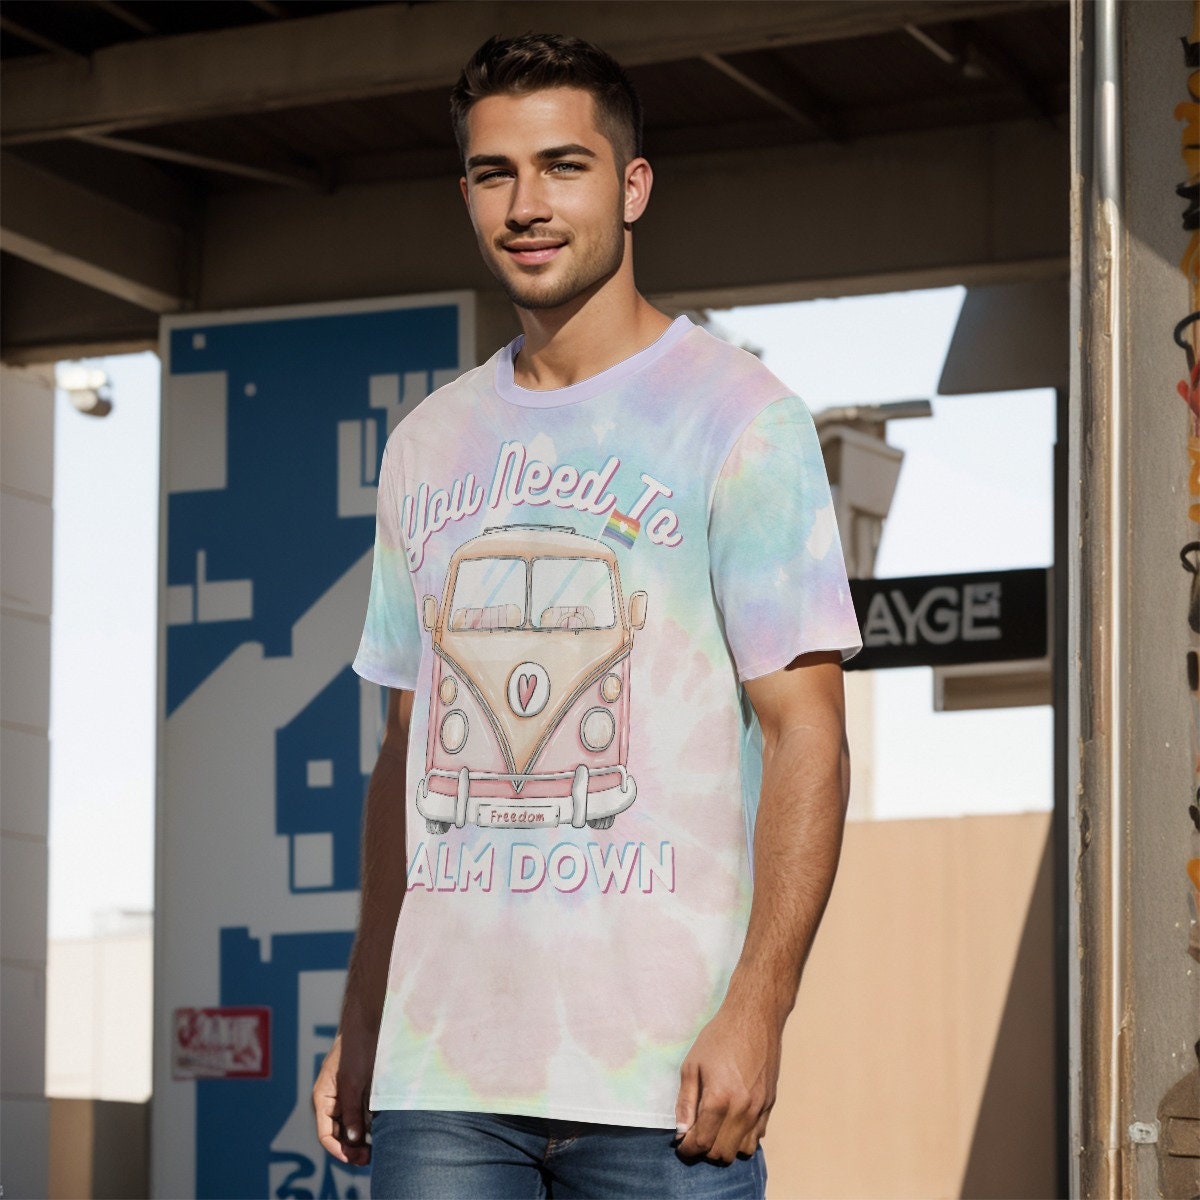 Taylor Merch for Men - You Need To Calm Down - Rainbow Tie Dye shirt